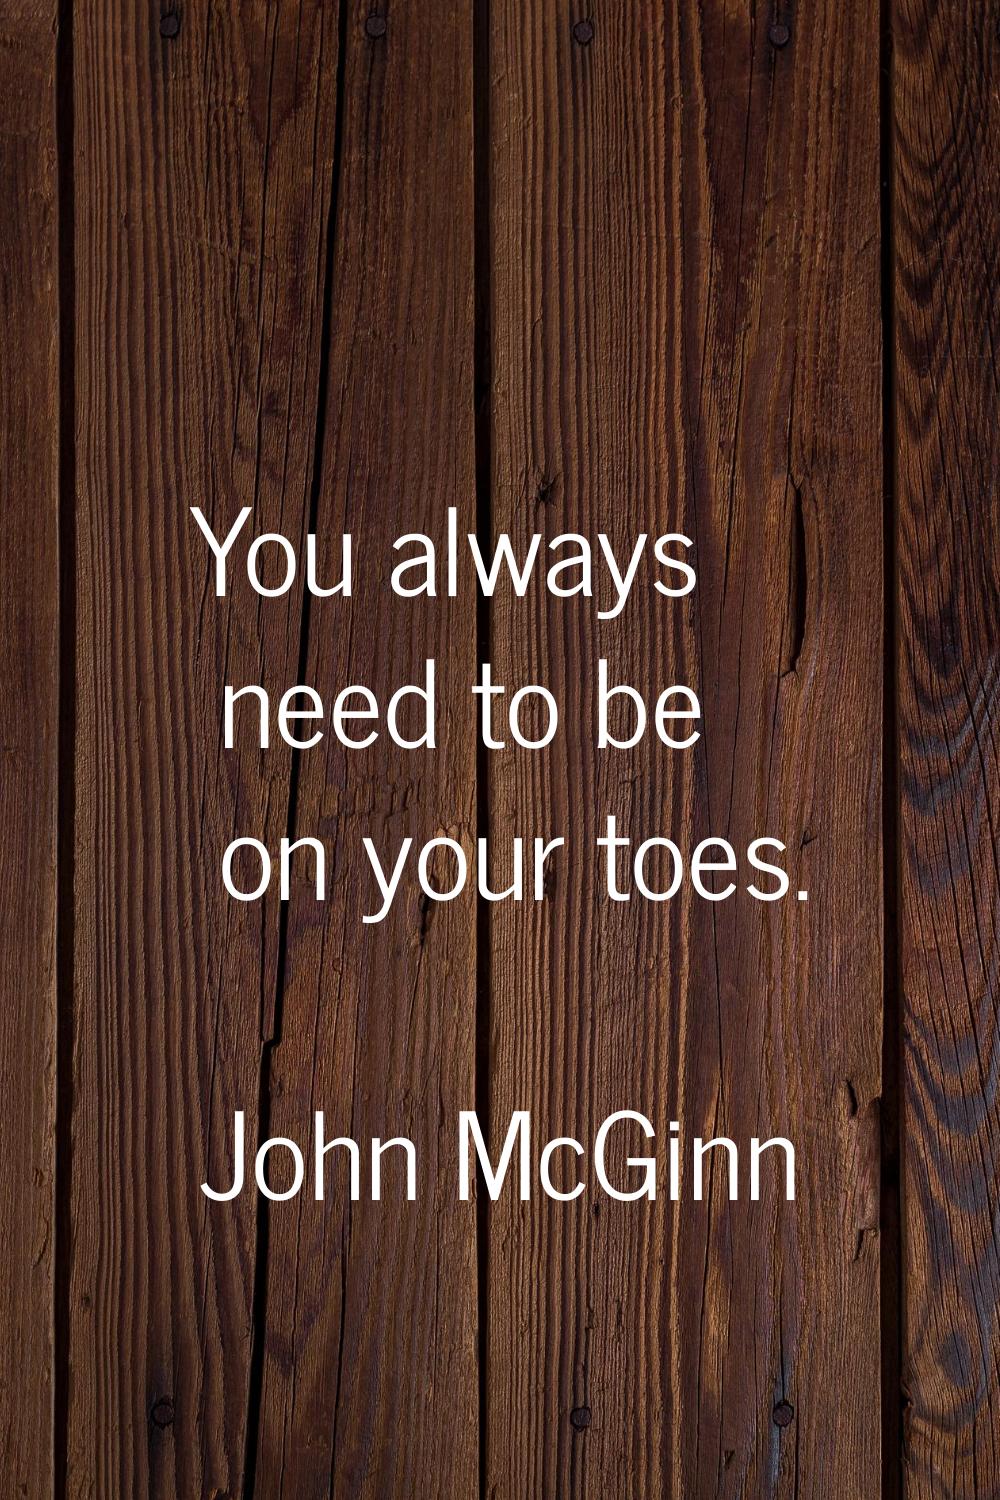 You always need to be on your toes.